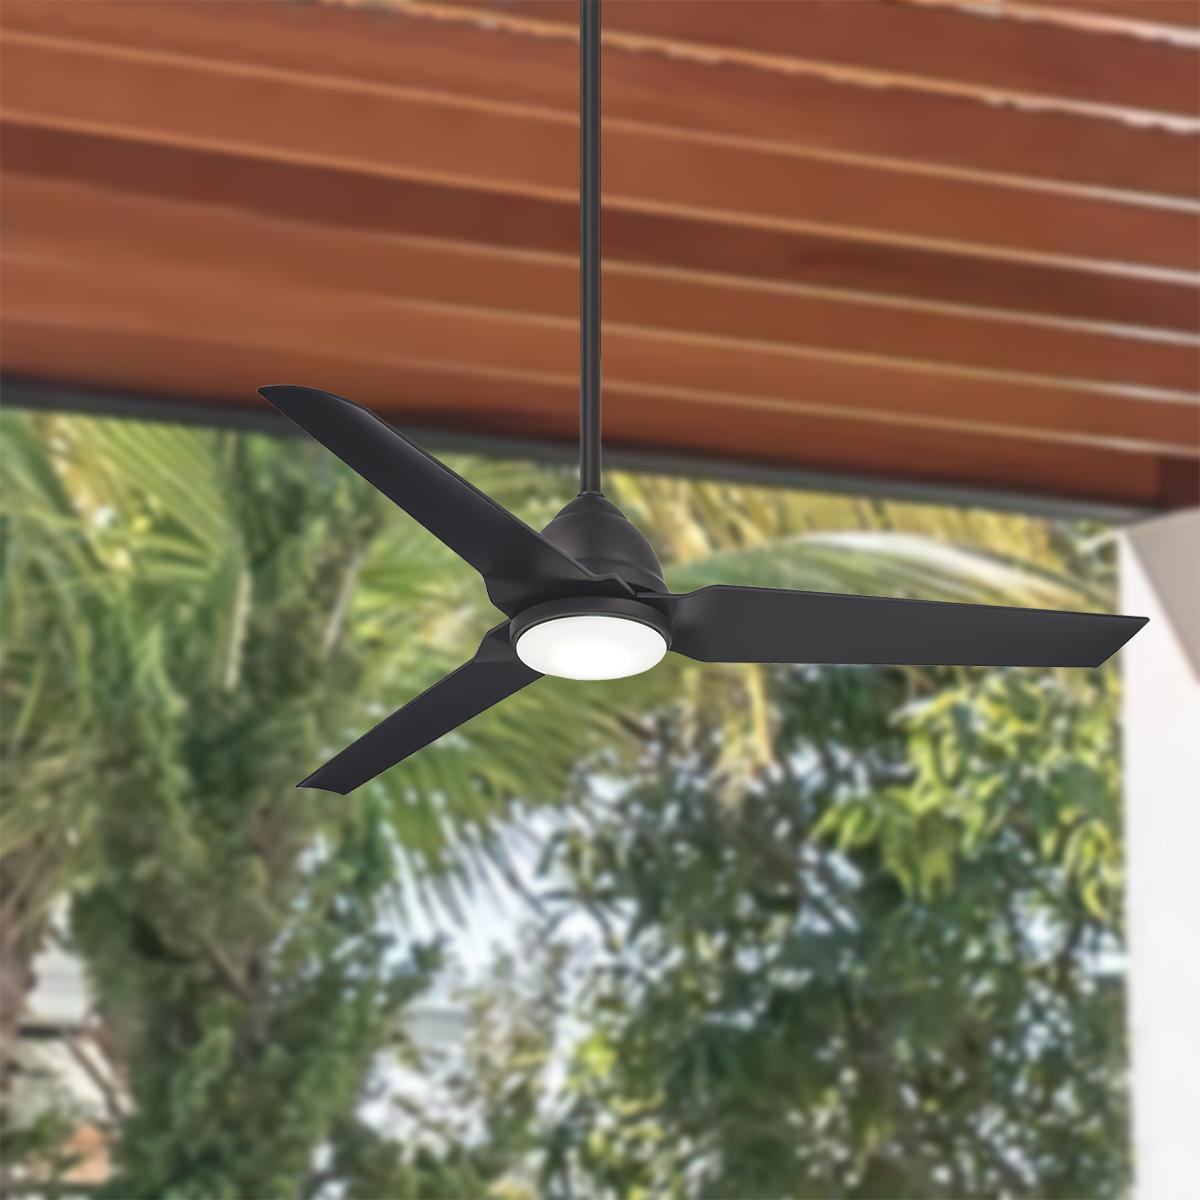 Java 54 Inch Modern Propeller Outdoor Ceiling Fan With Light And Remote, Coal Finish